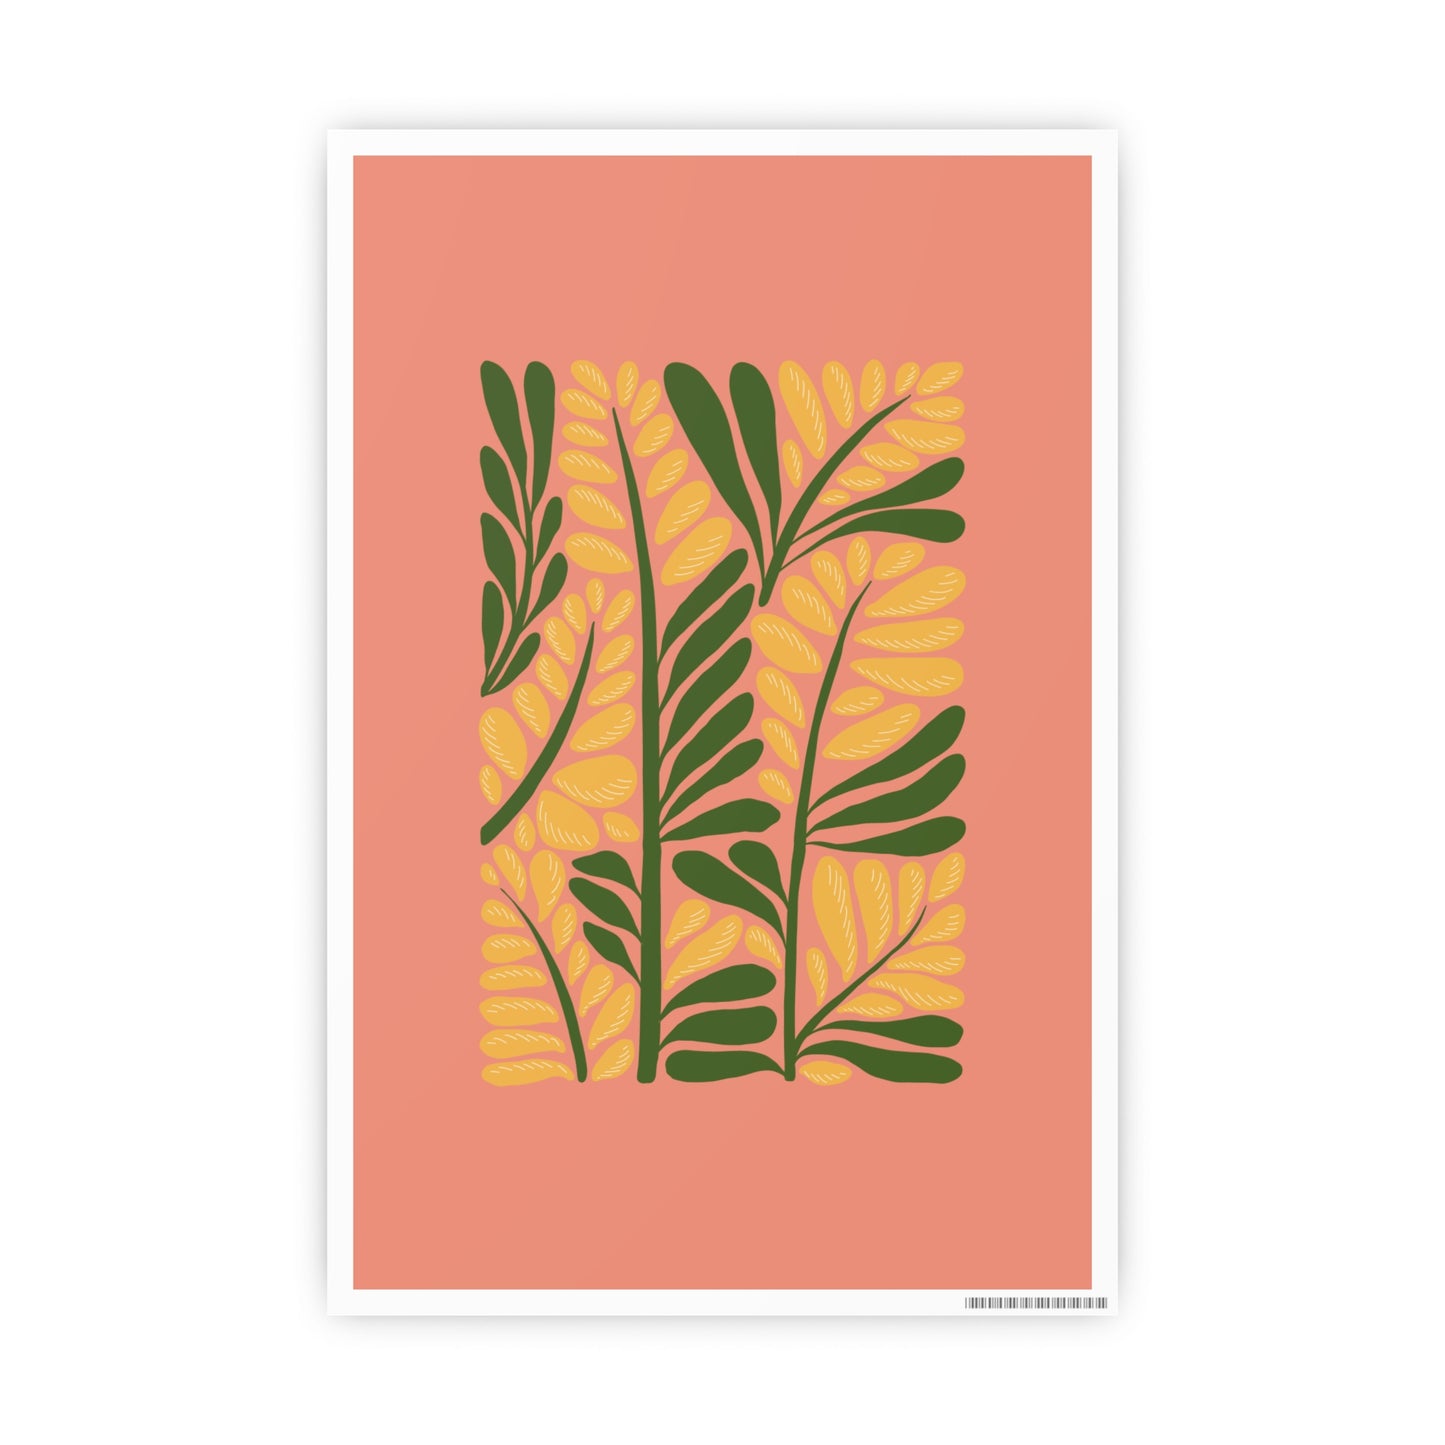 Vibrant Leafy Canvas Print Wall Poster